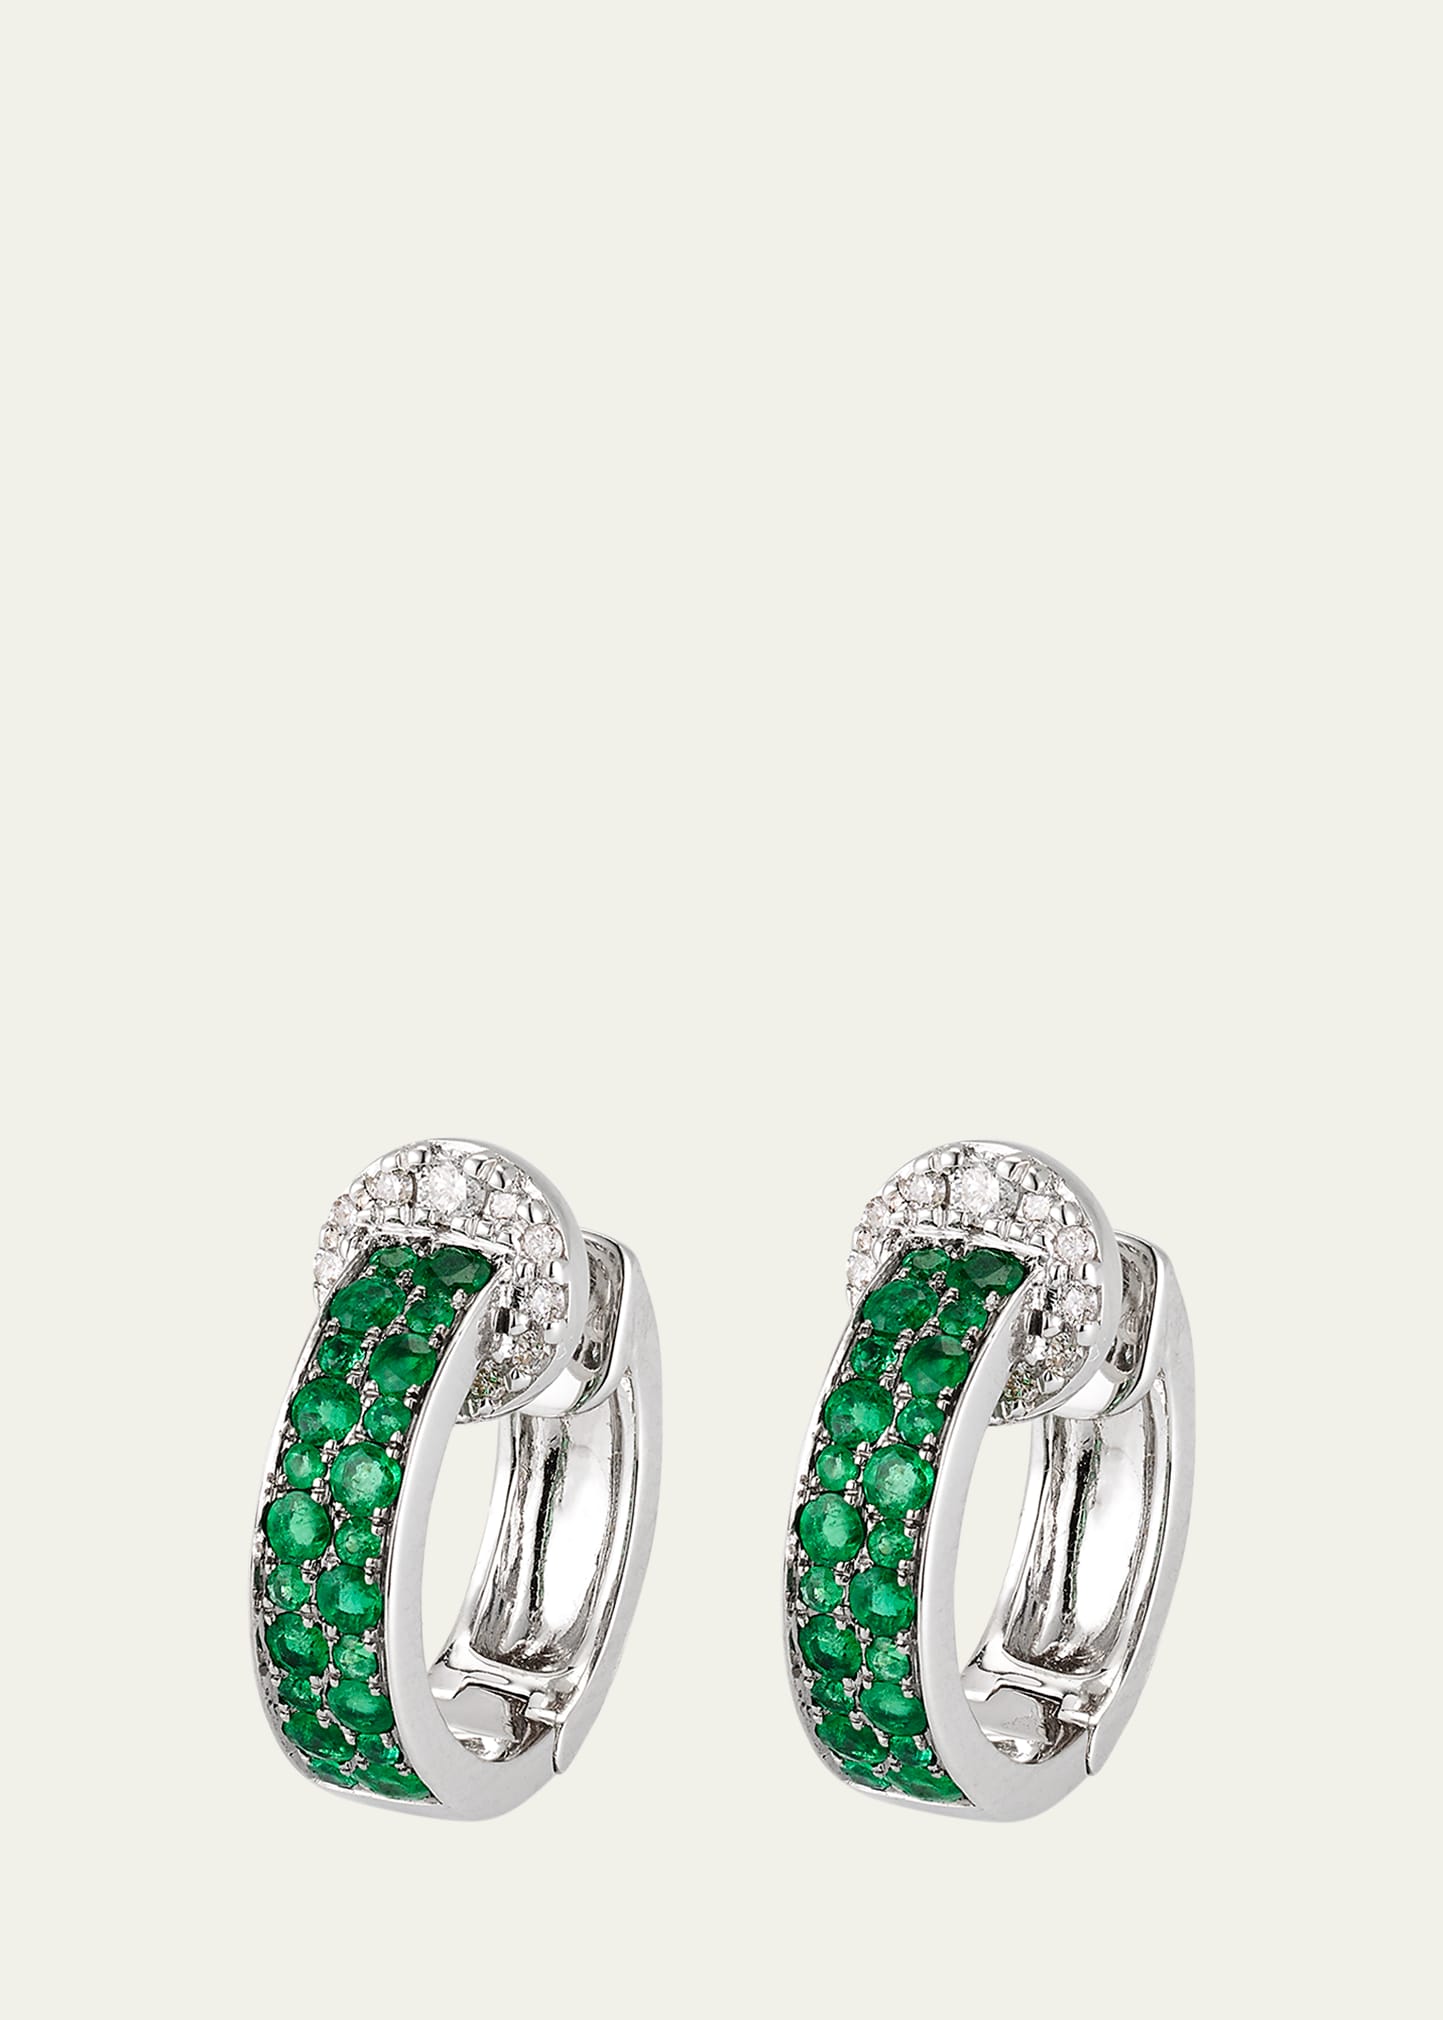 Nam Cho 18k White Gold Hoop Earrings With Diamonds And Emeralds In Metallic